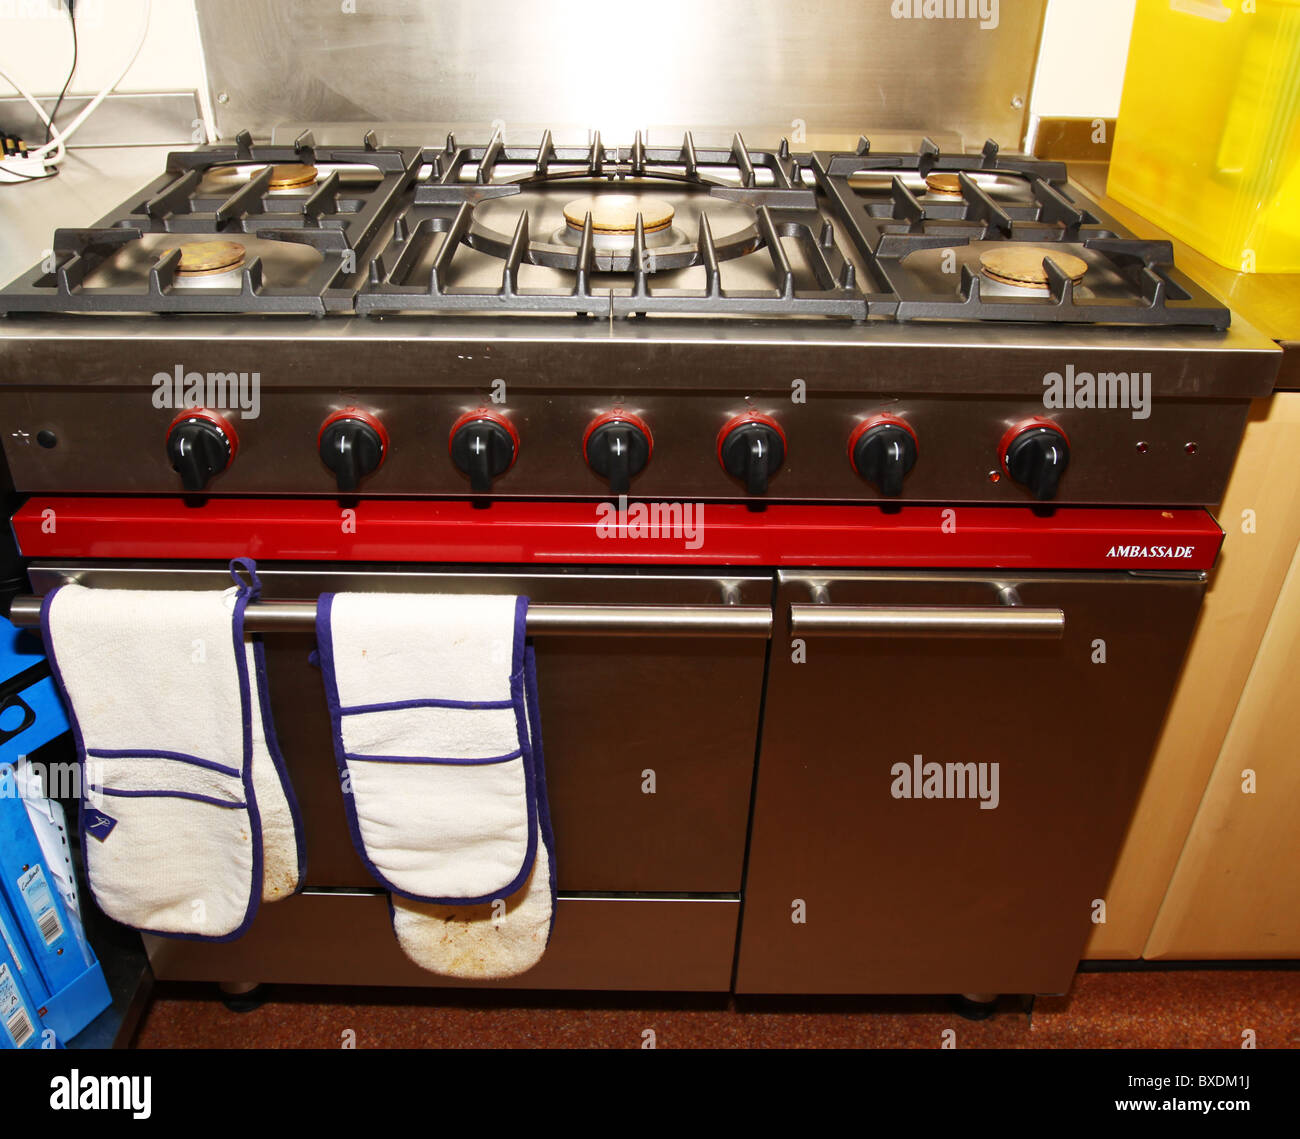 Commercial gas cooking range cooker Stock Photo - Alamy